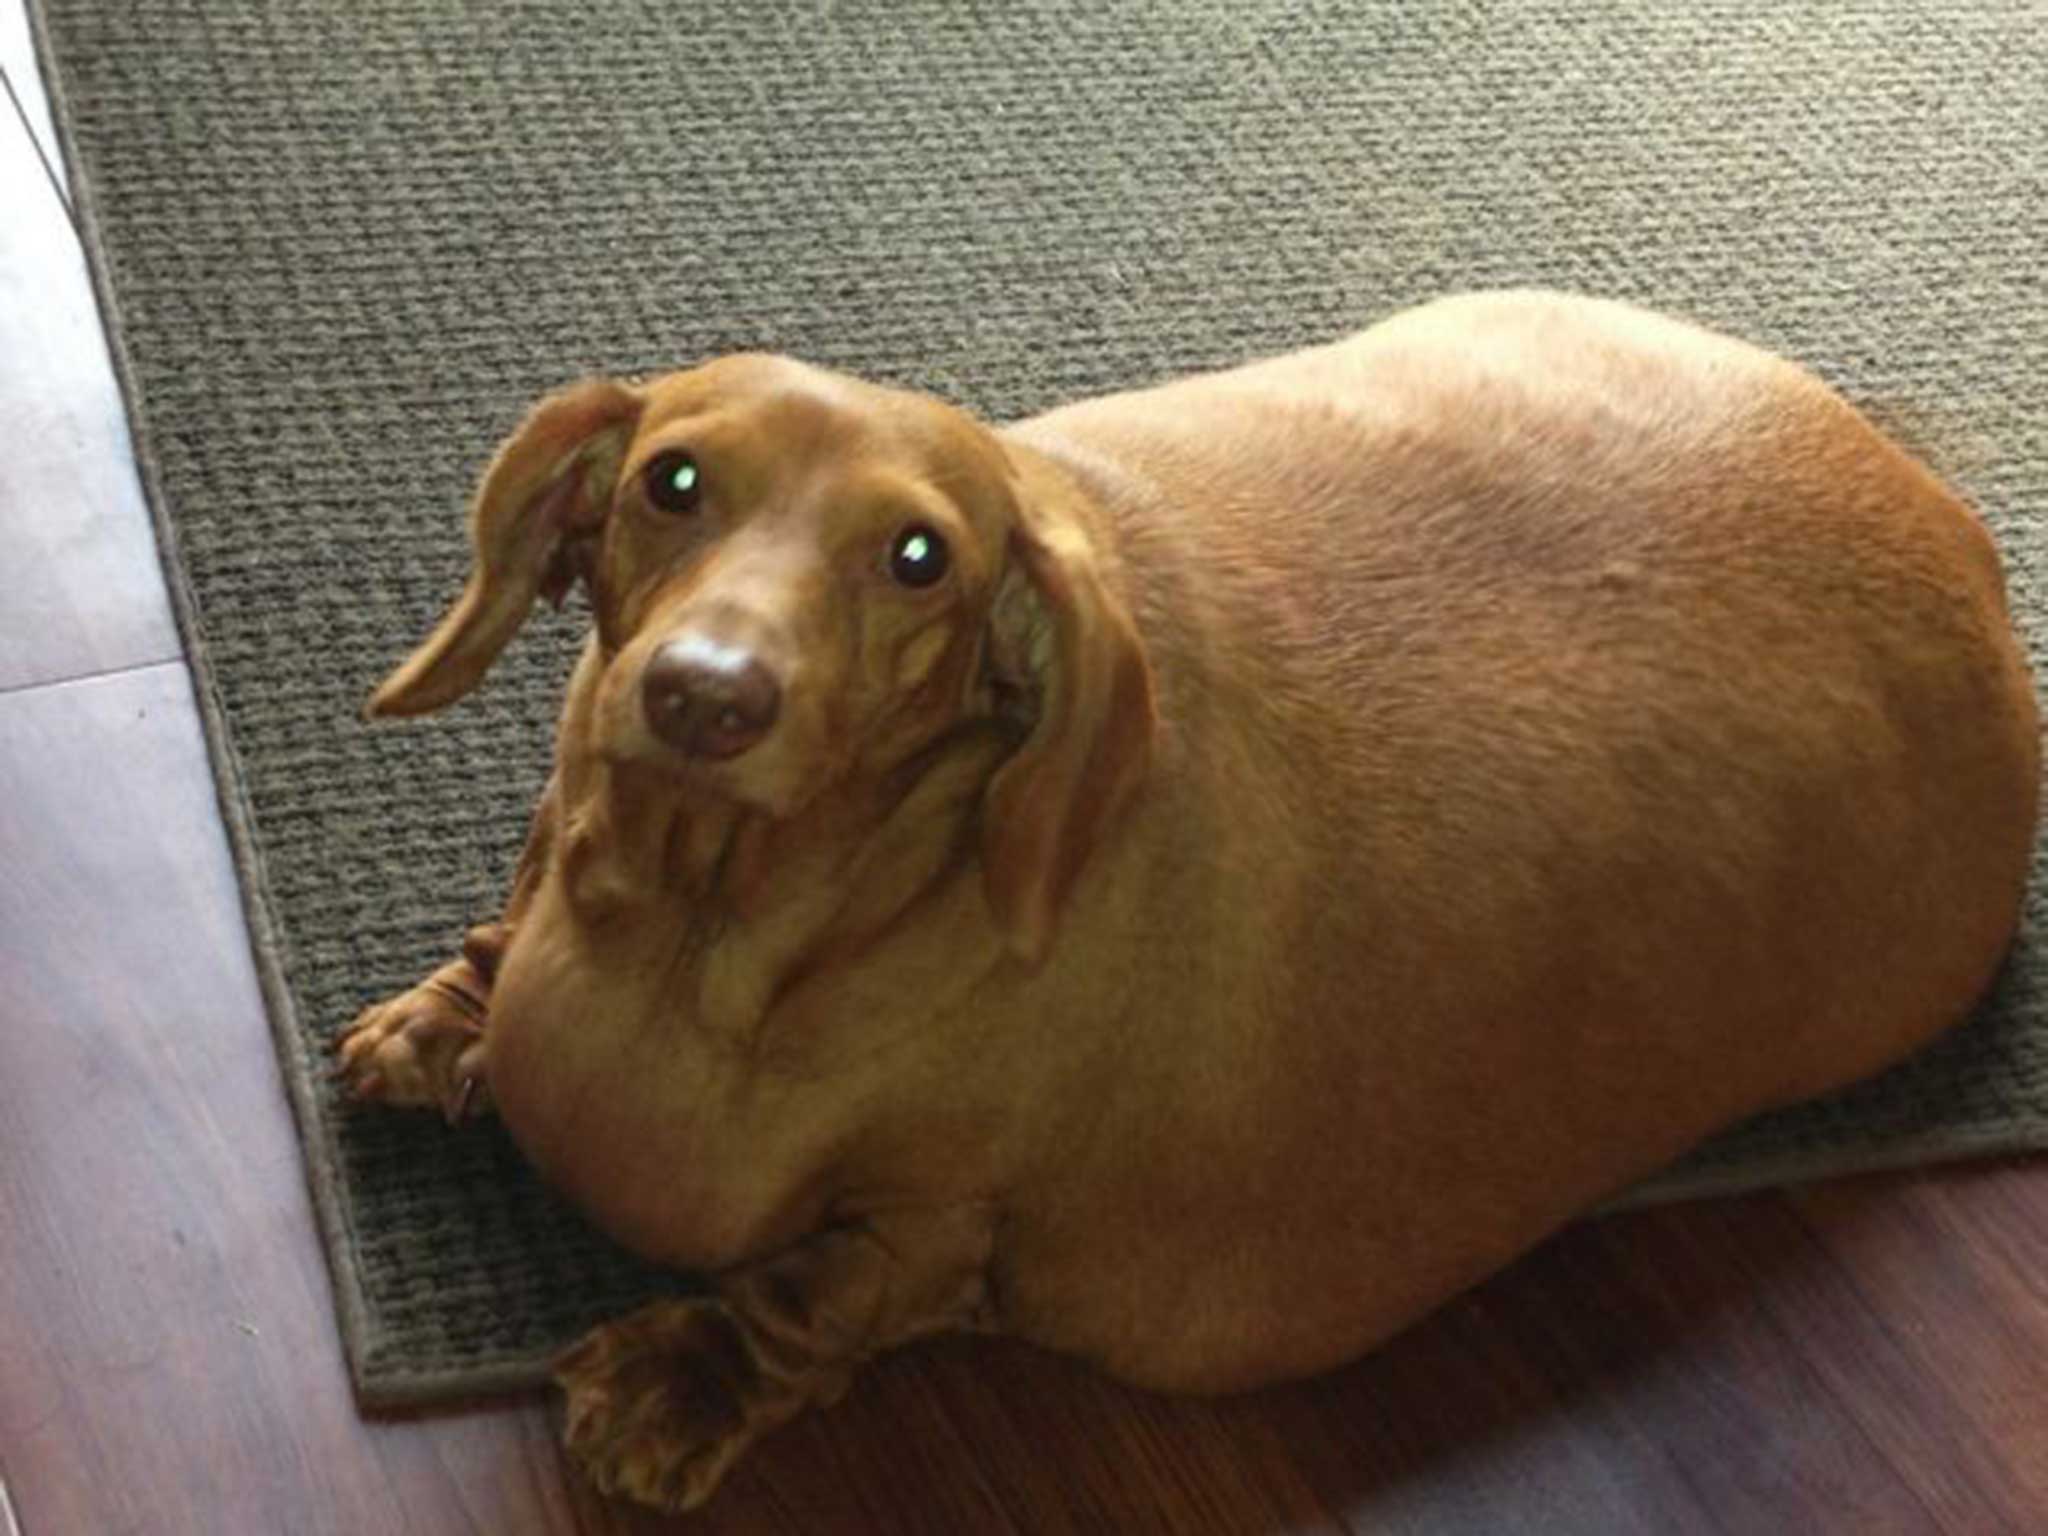 Dennis the dog: Obese dachshund loses 75% of his bodyweight | The